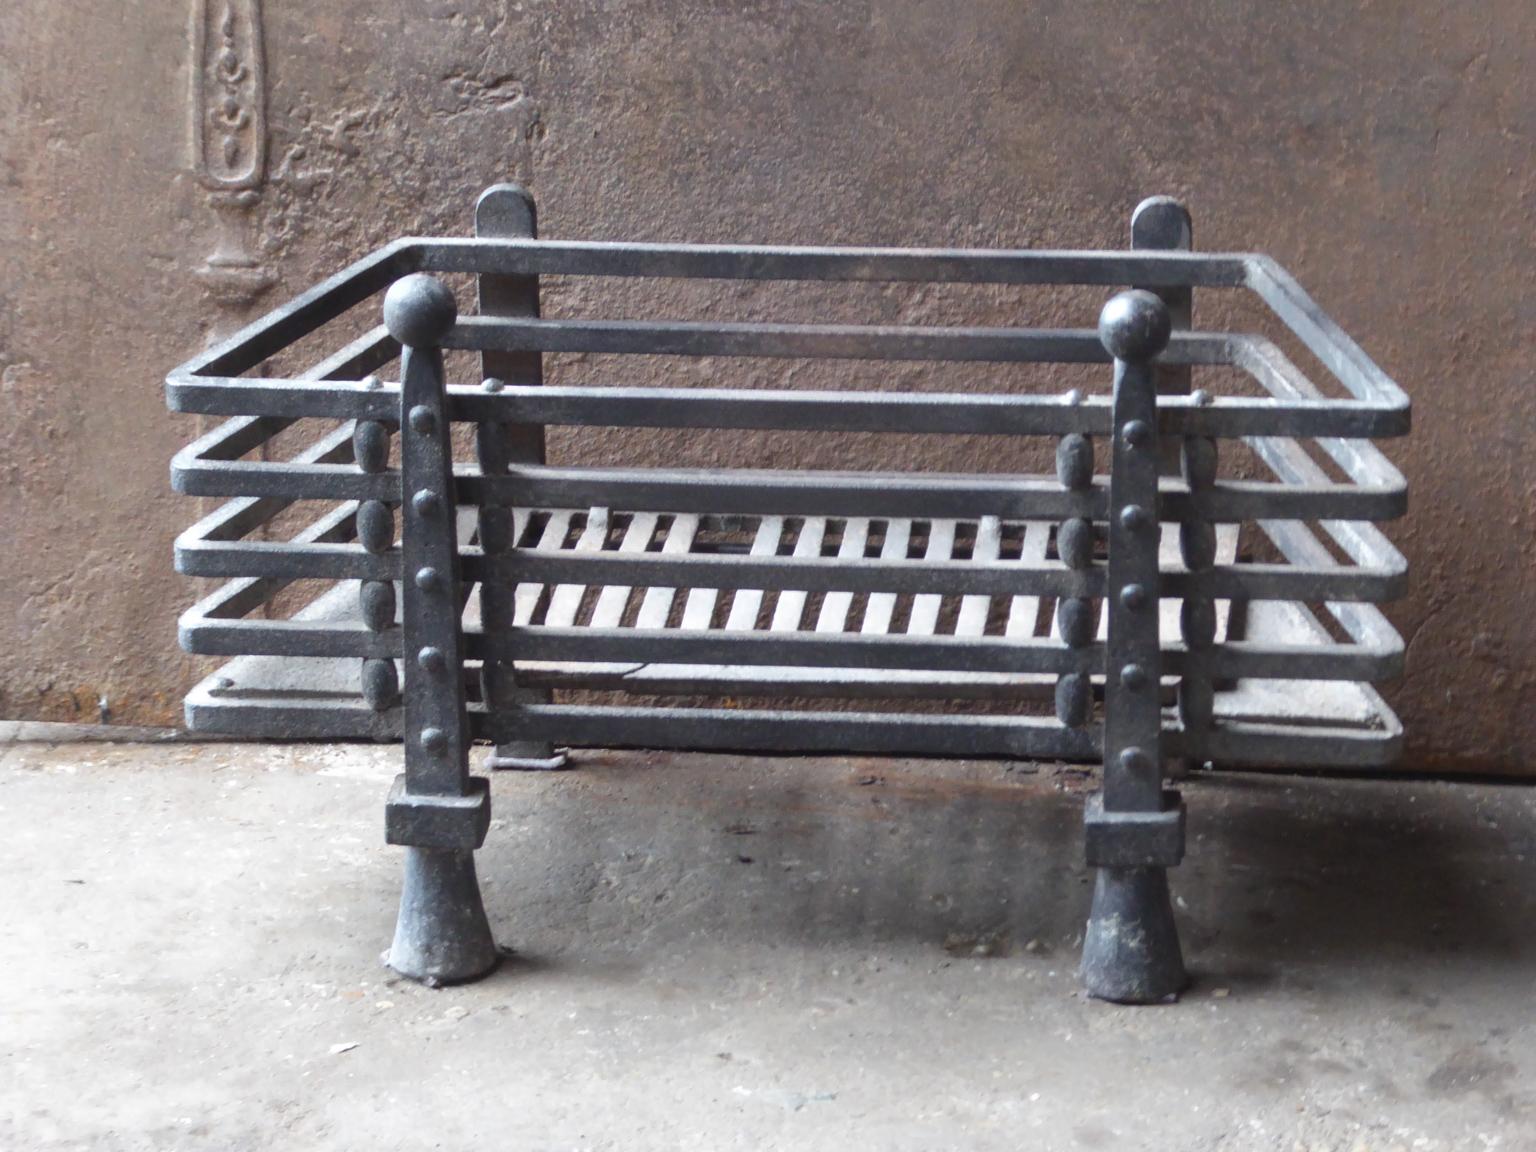 Early 20th century French Art Deco fireplace basket - fire basket made of wrought iron and cast iron. The basket is in a good condition and is fully functional.

Measures: Width at front is 62 cm 24.4